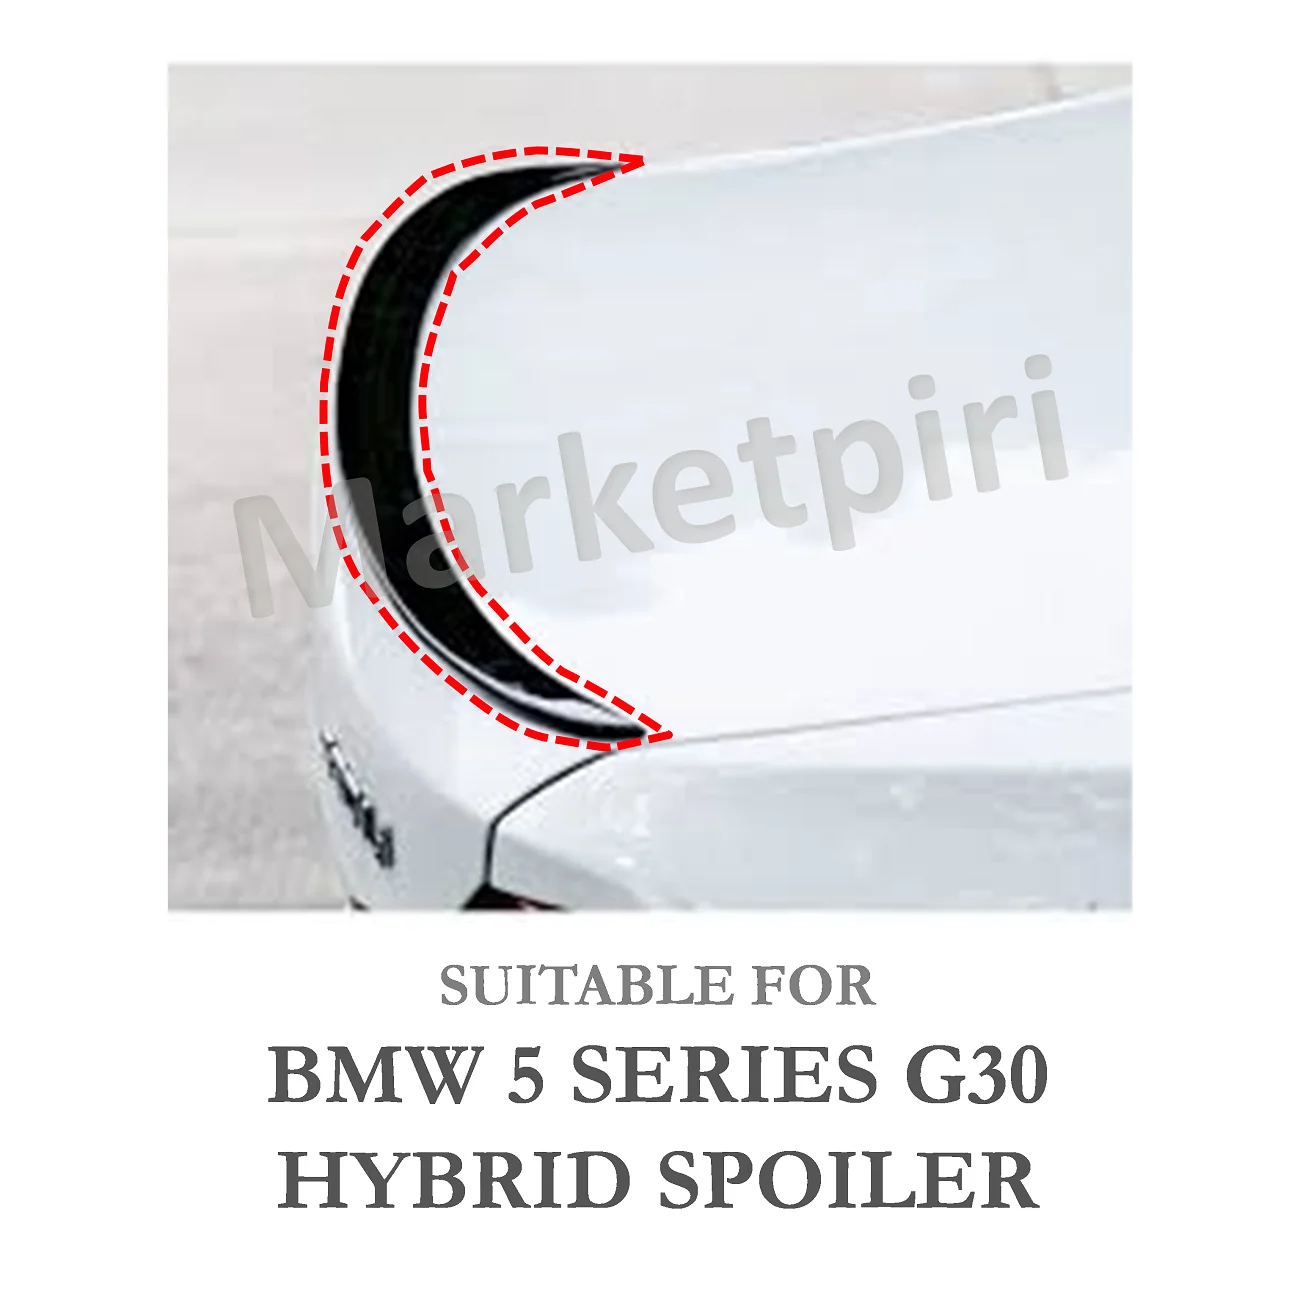 

For BMW 5 Series G30 Hybrid Spoiler Car Accessory Sporty Looking, High Quality, Aftermarket Product